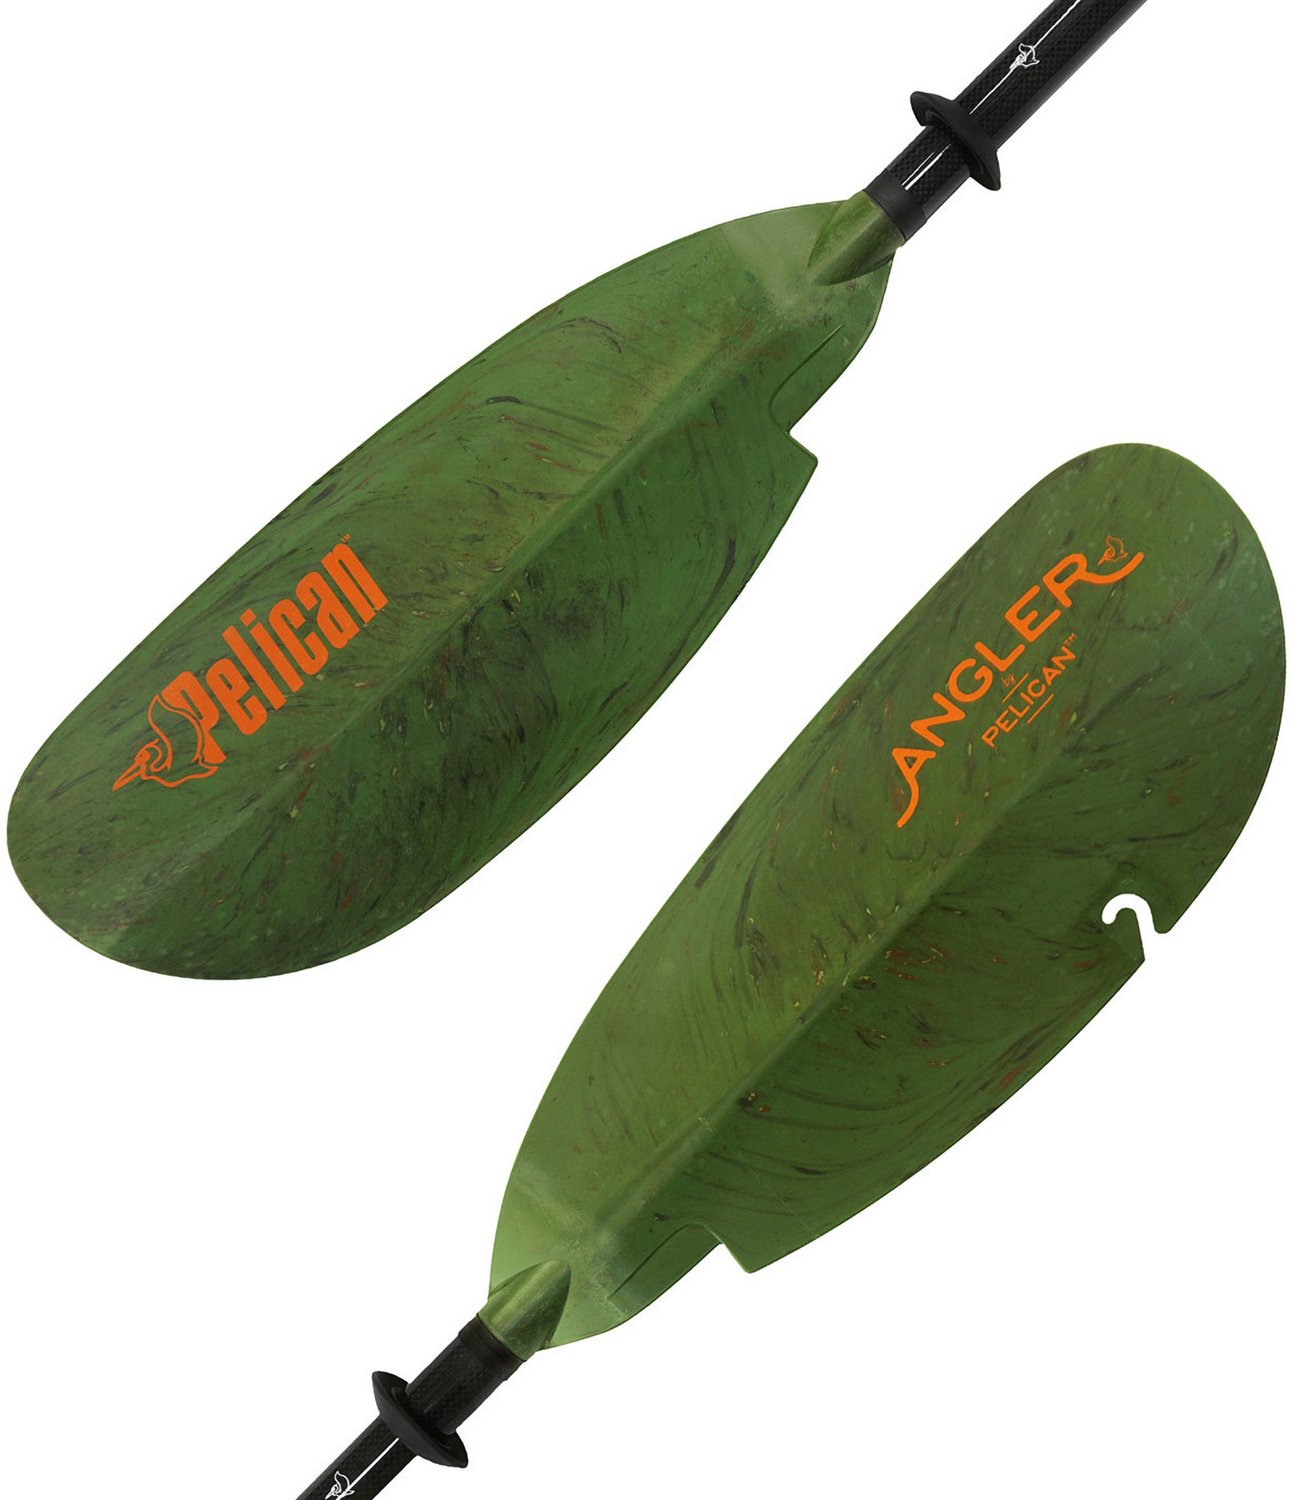 Academy Sports + Outdoors Pelican Catch Fishing Kayak Paddle